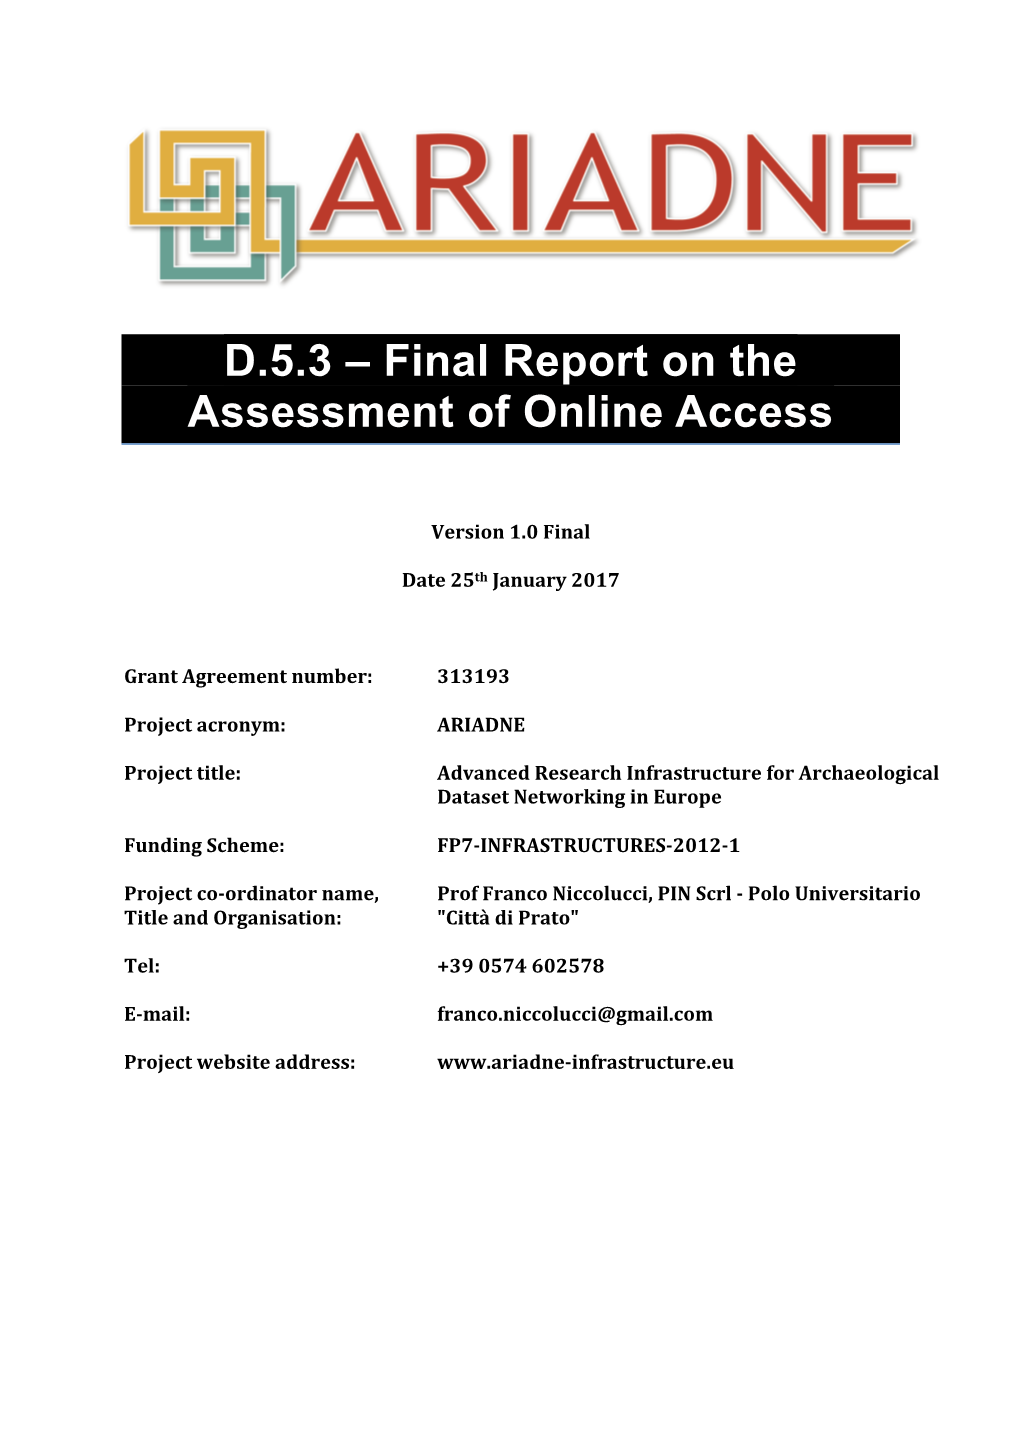 Final Report on the Assessment of Online Access